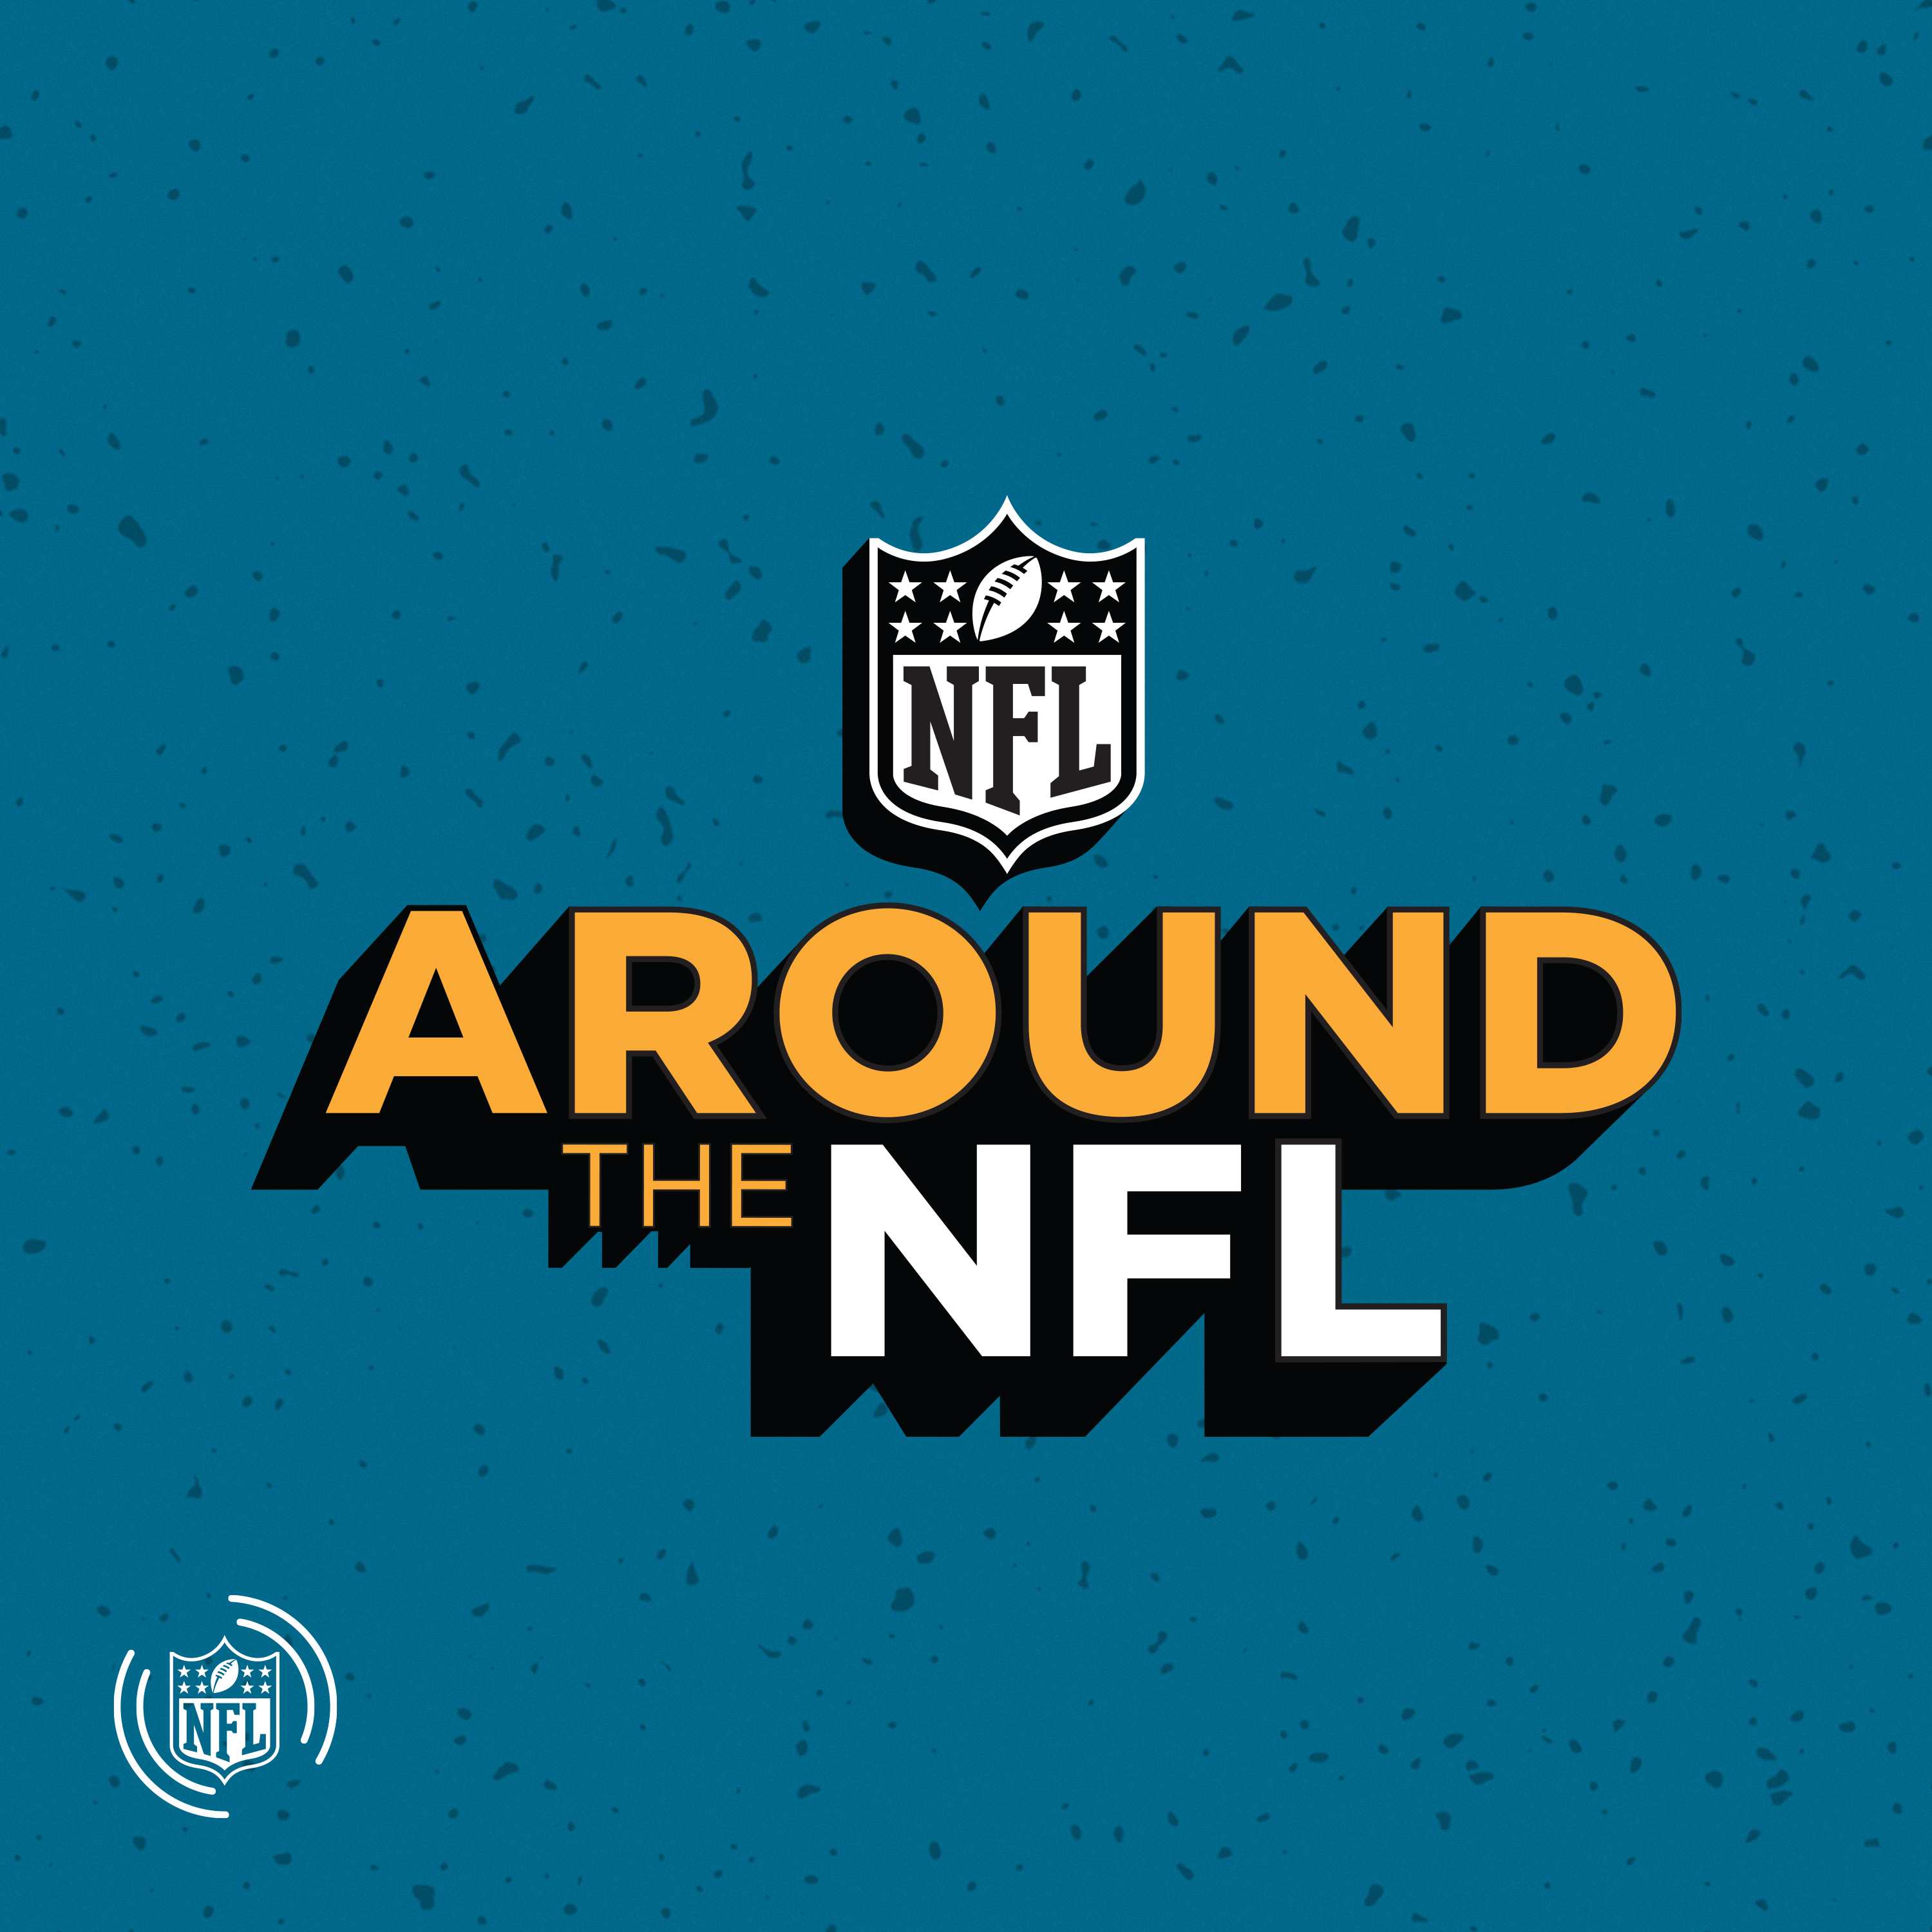 Kyler’s Contract, Julio Jones, and Sounds from Training Camp (with Ian Rapoport)